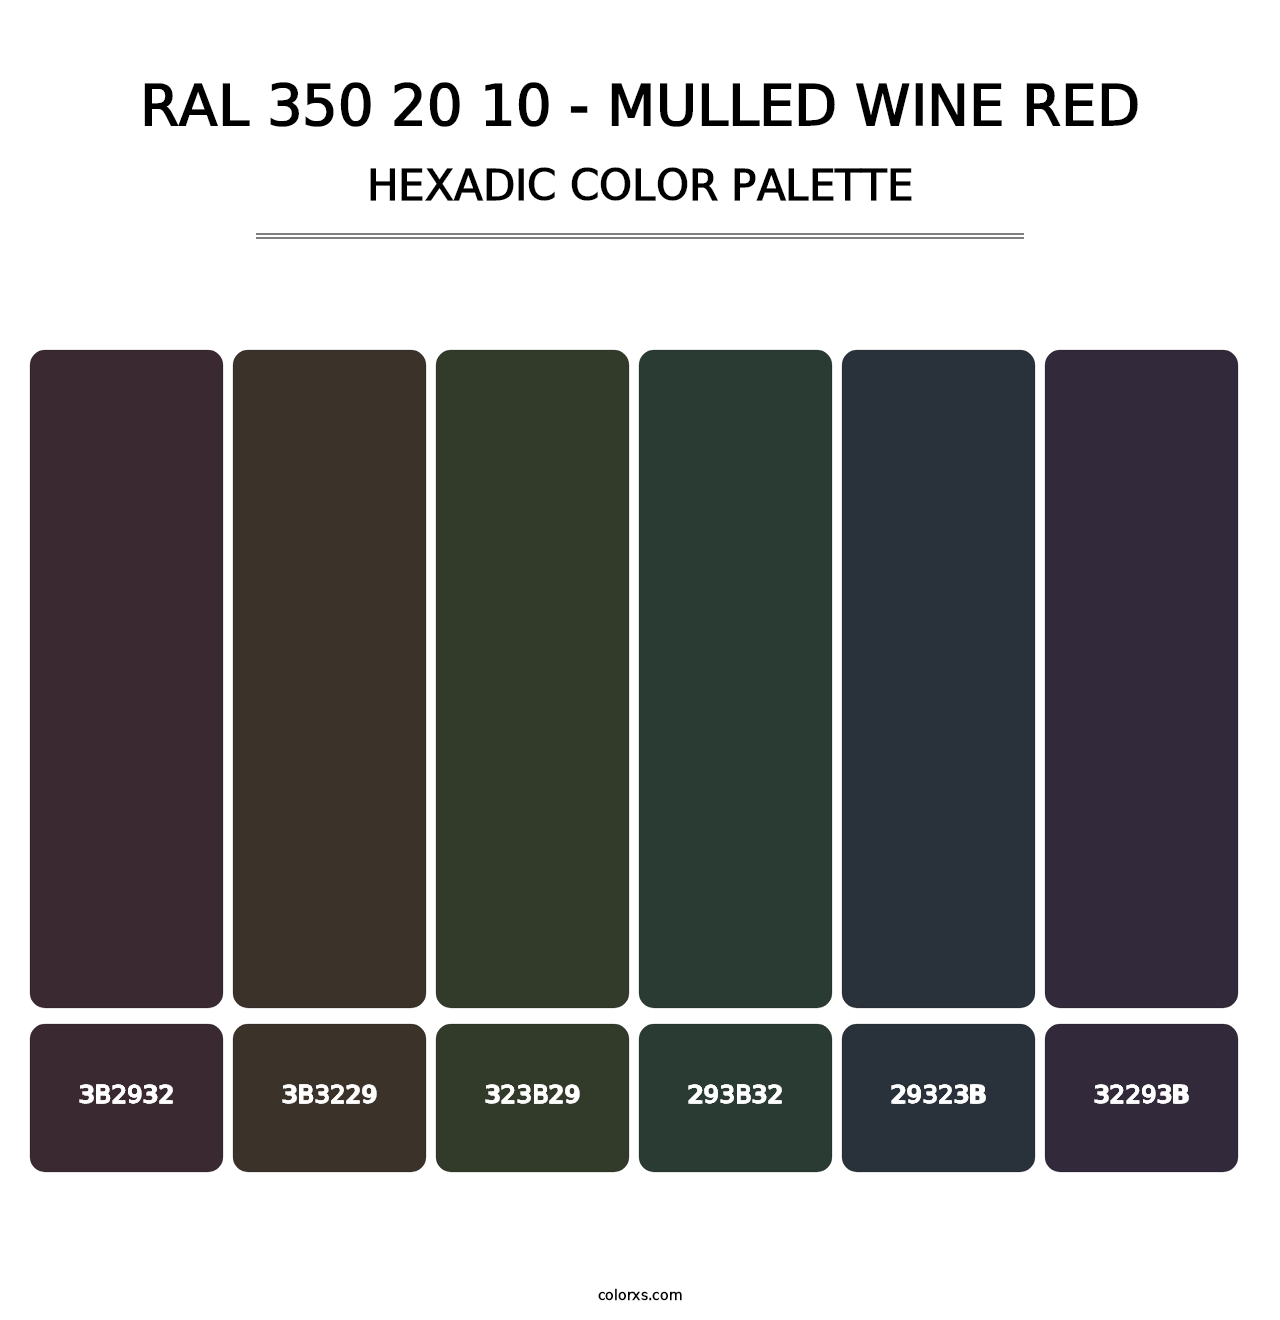 RAL 350 20 10 - Mulled Wine Red - Hexadic Color Palette